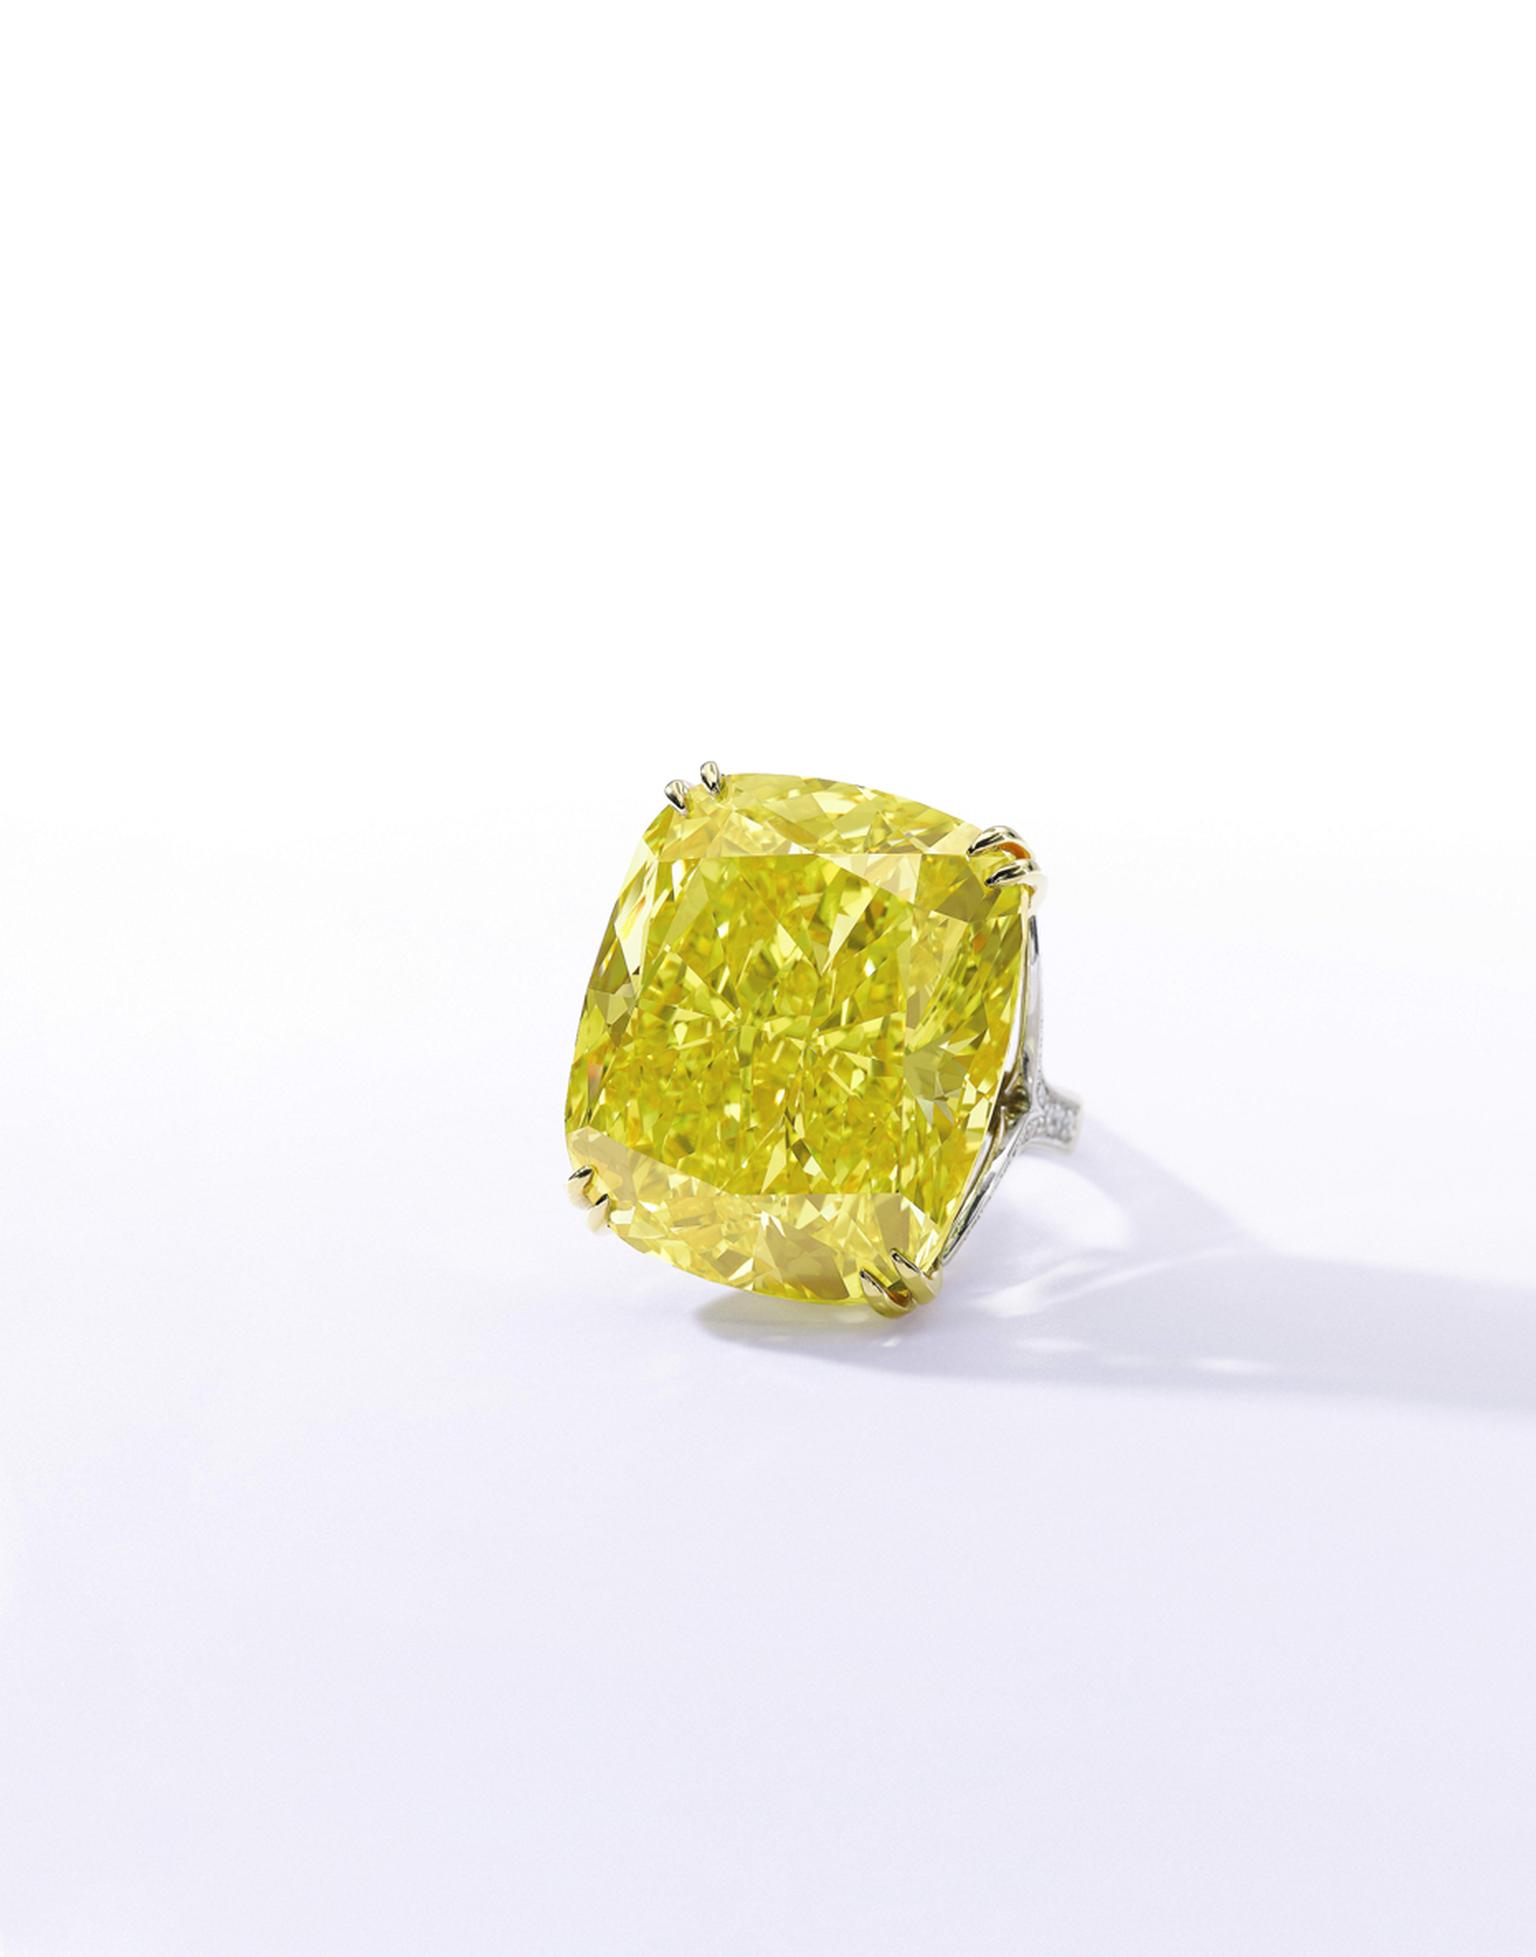 The 100.09ct Graff Vivid Yellow diamond features a Fancy Vivid Yellow, Natural Colour, VS2 Clarity diamond. Sold for CHF 14.5million (estimate: CHF 13.4- 22.3million). Image by: Sothebys.